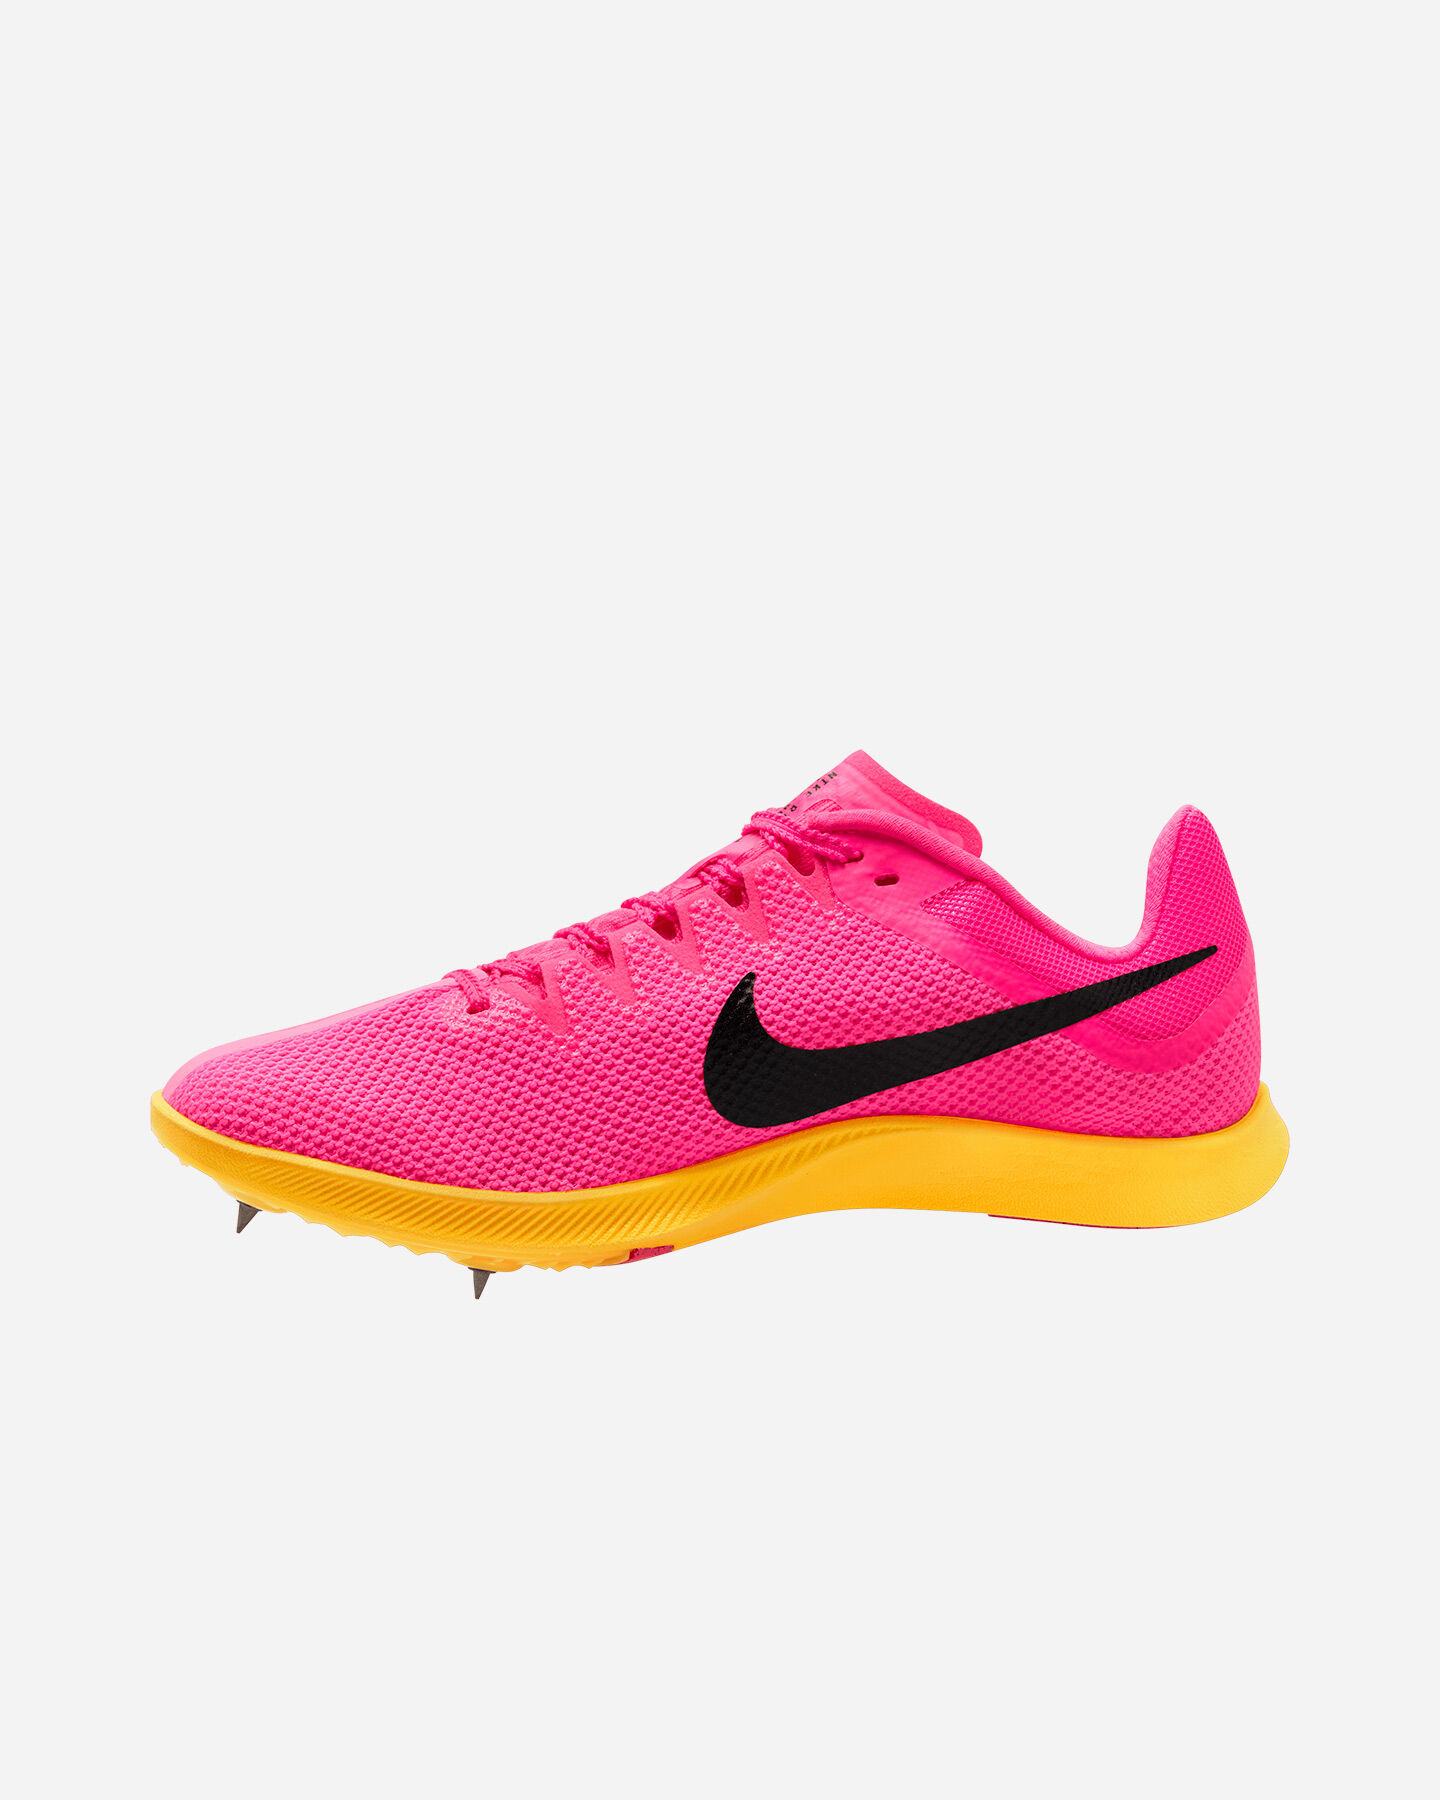  Scarpe running NIKE ZOOM RIVAL DISTANCE TRACK & FIELD M S5494726|600|11 scatto 2